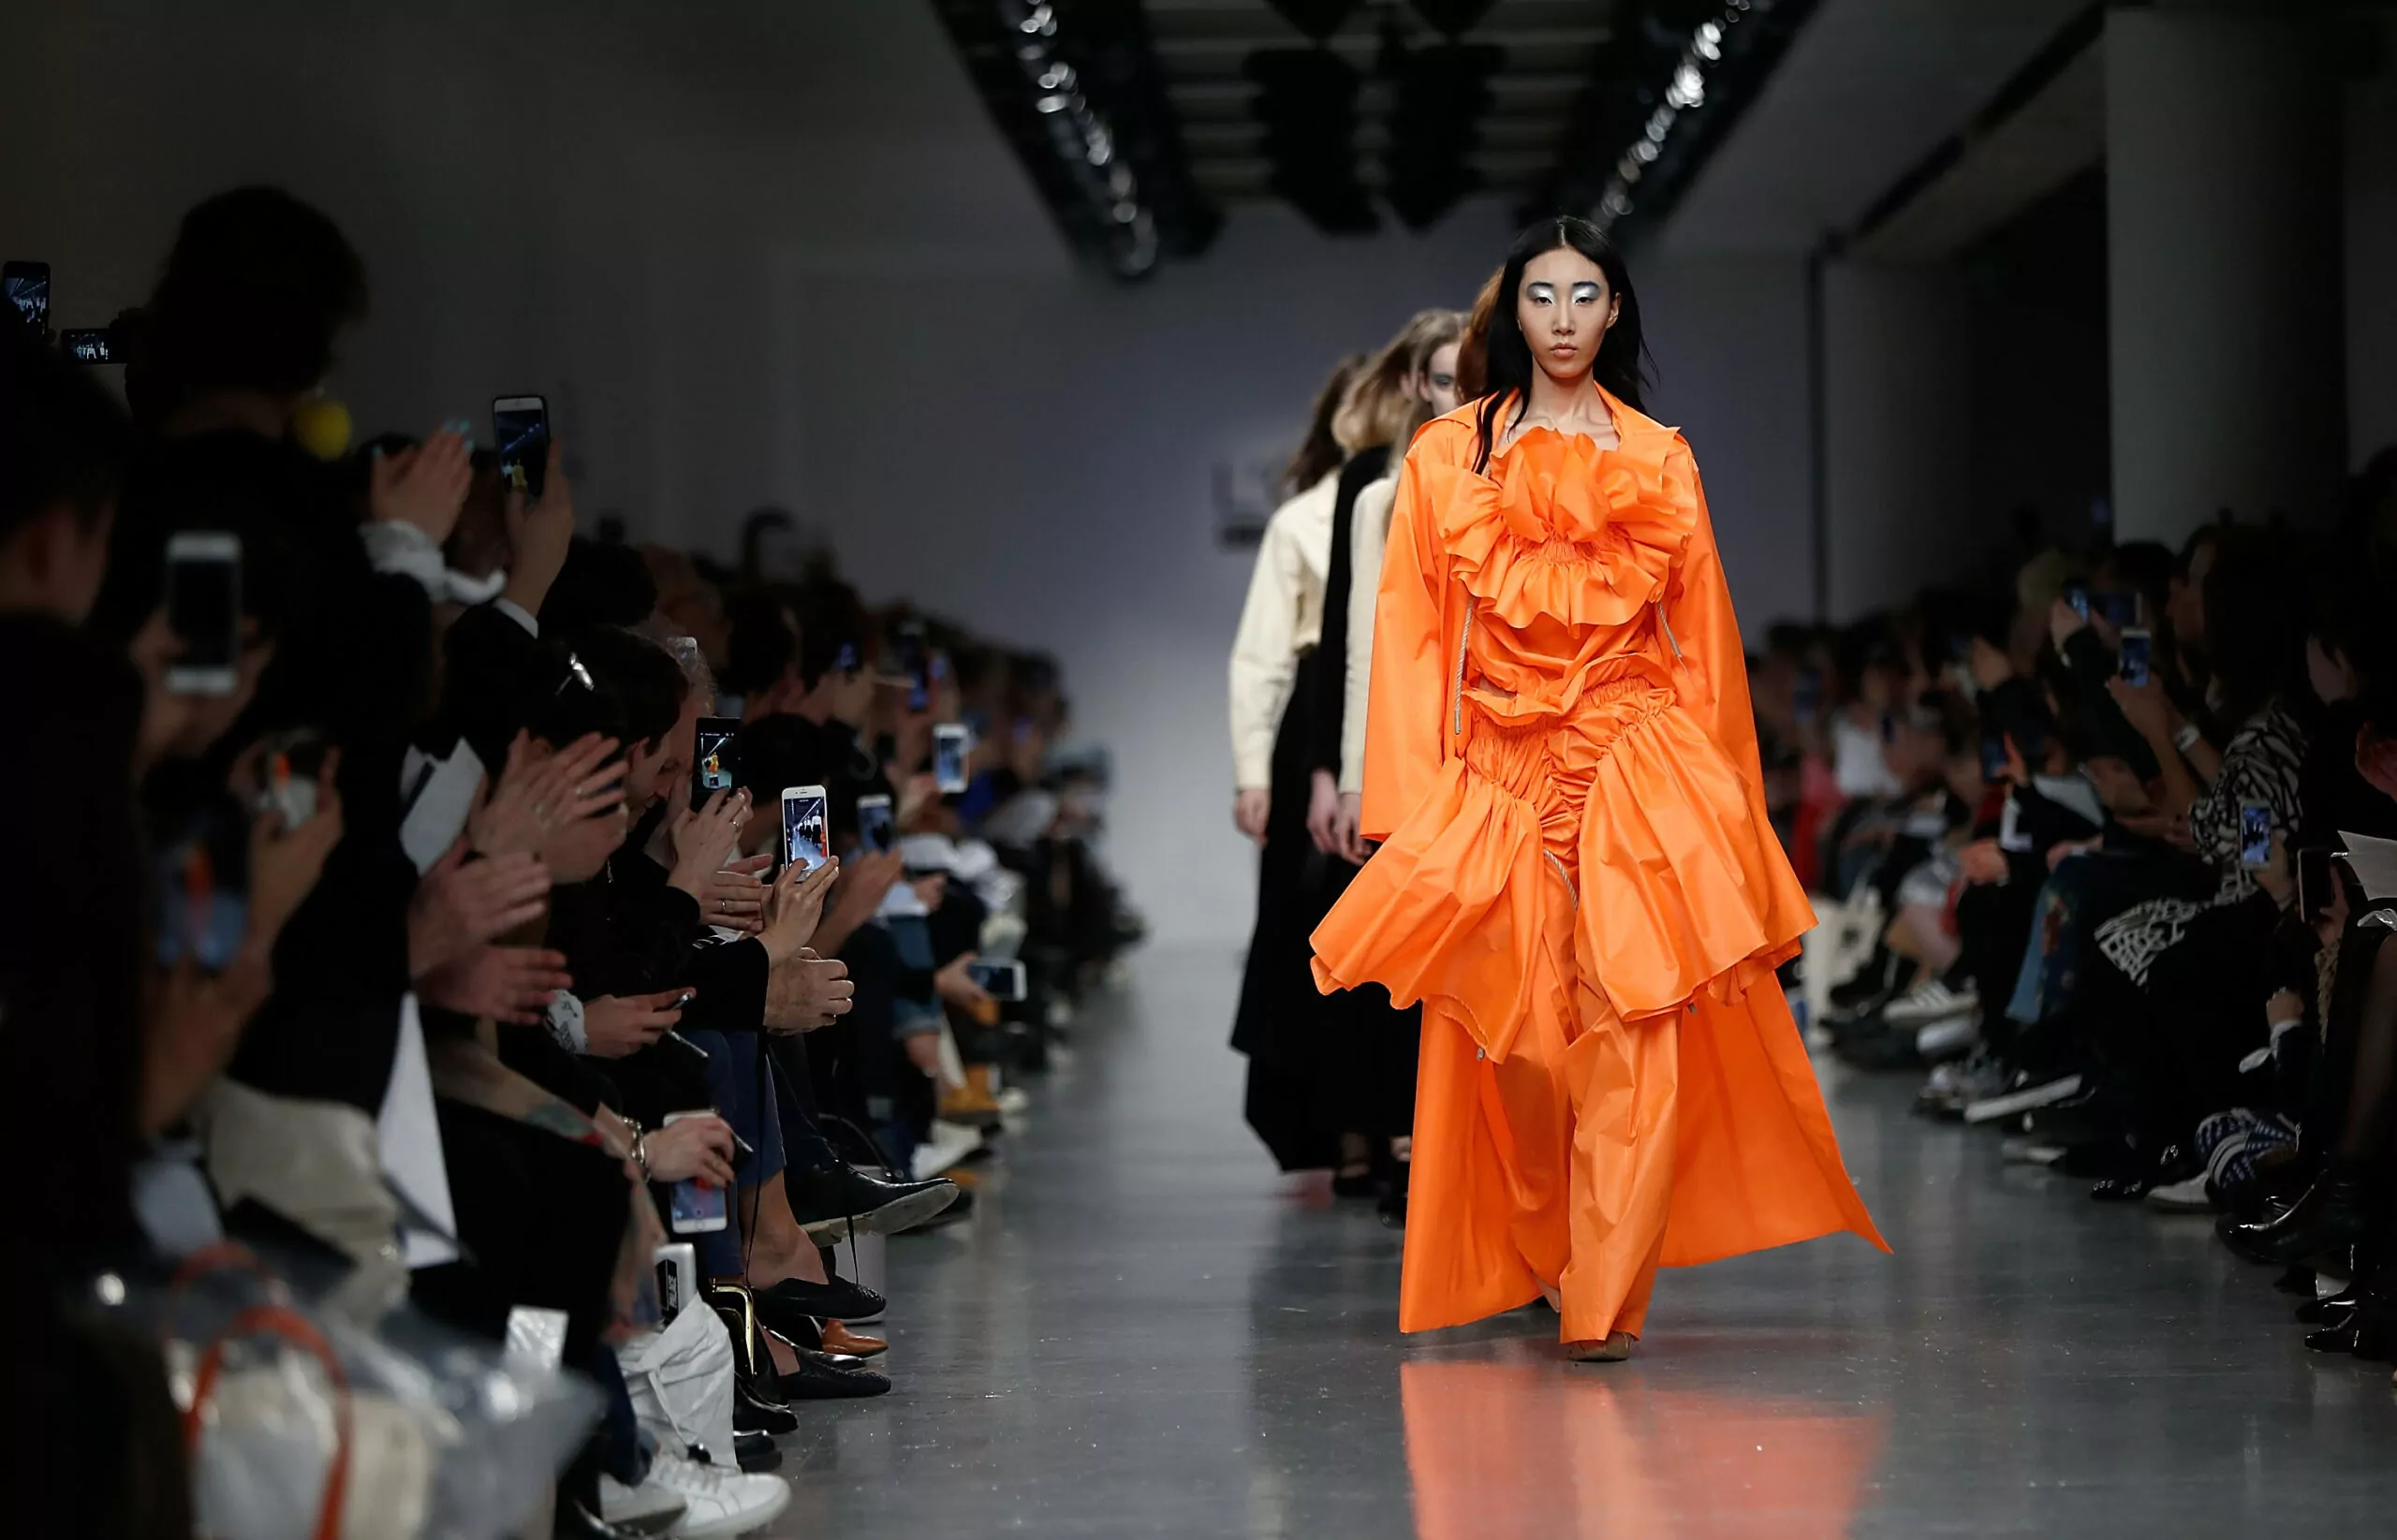 LONDON, ENGLAND - FEBRUARY 17: A model walks the runway at the Central Saint Martins MA show during the London Fashion Week February 2017 collections on February 17, 2017 in London, England. (Photo by John Phillips/John Phillips/Getty Images)